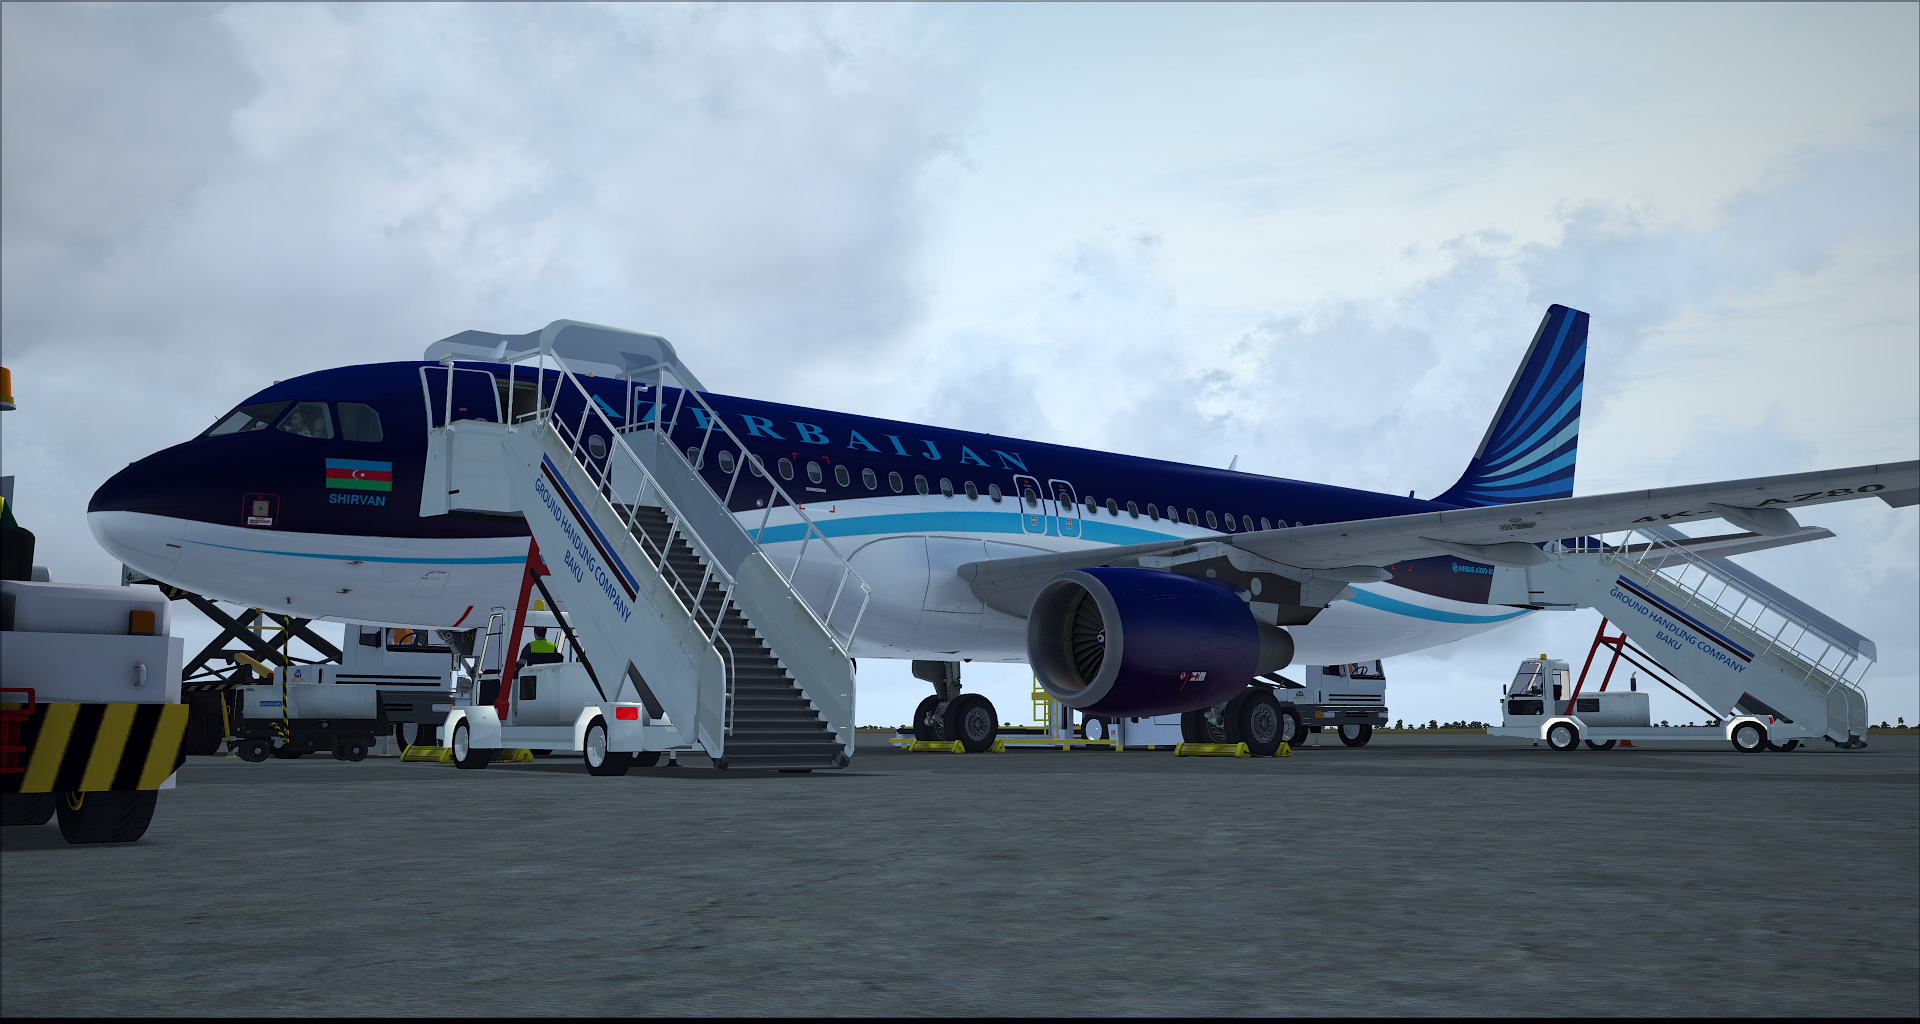 More information about "Azerbaijan Airlines A320 / Airbus X Extended"